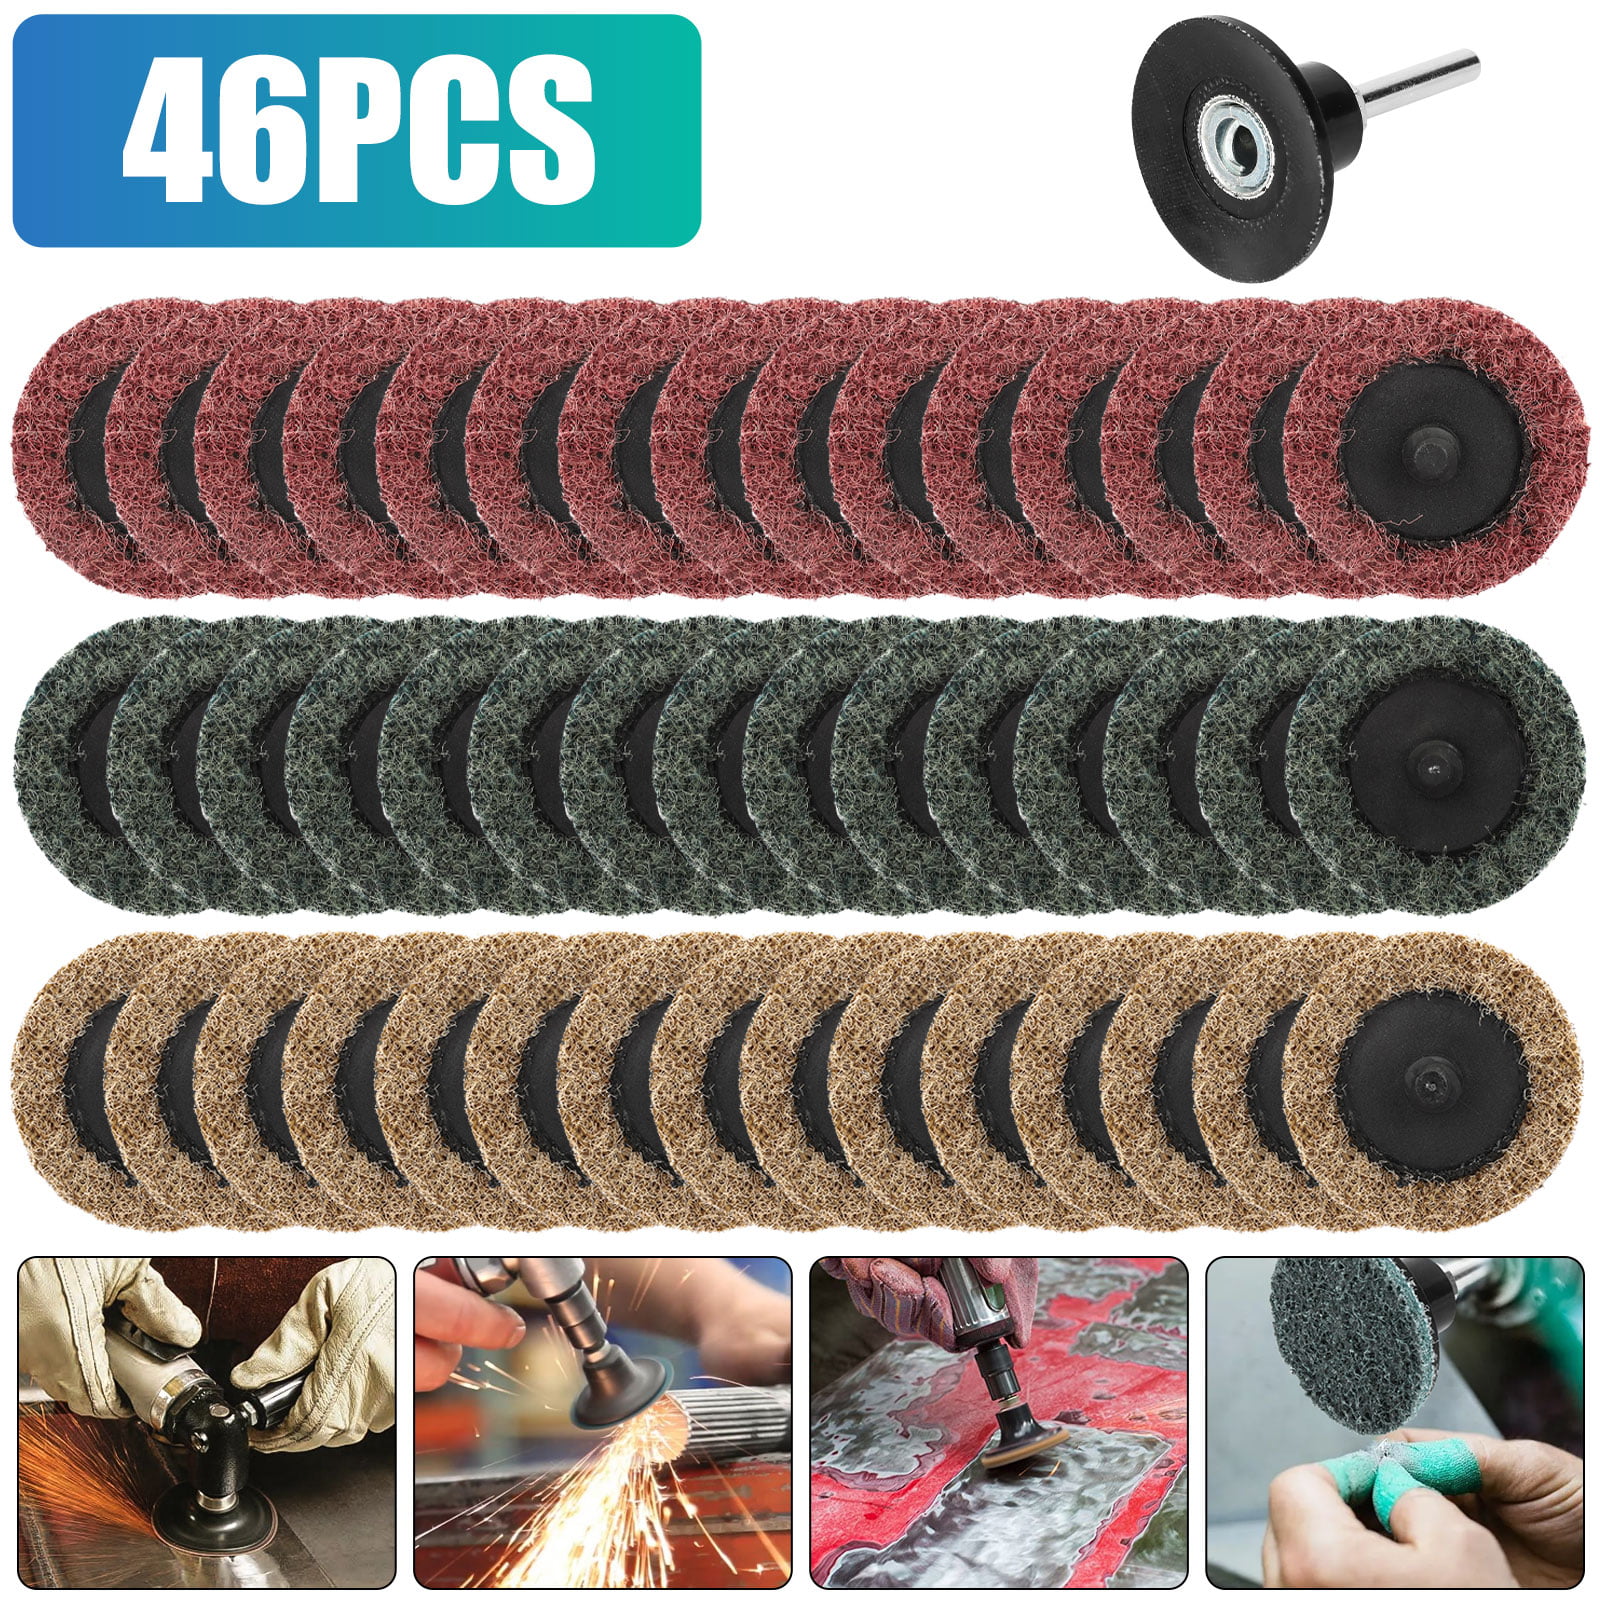 BAYTORY 62Pcs Mixup Quick Change Discs Set Fine Medium Coarse for Die Grinder to Remove Burr Prep Strip Grind Rust Paints Polish Metal 2 inch Sanding Surface Conditioning Discs with 1/4 Holder 